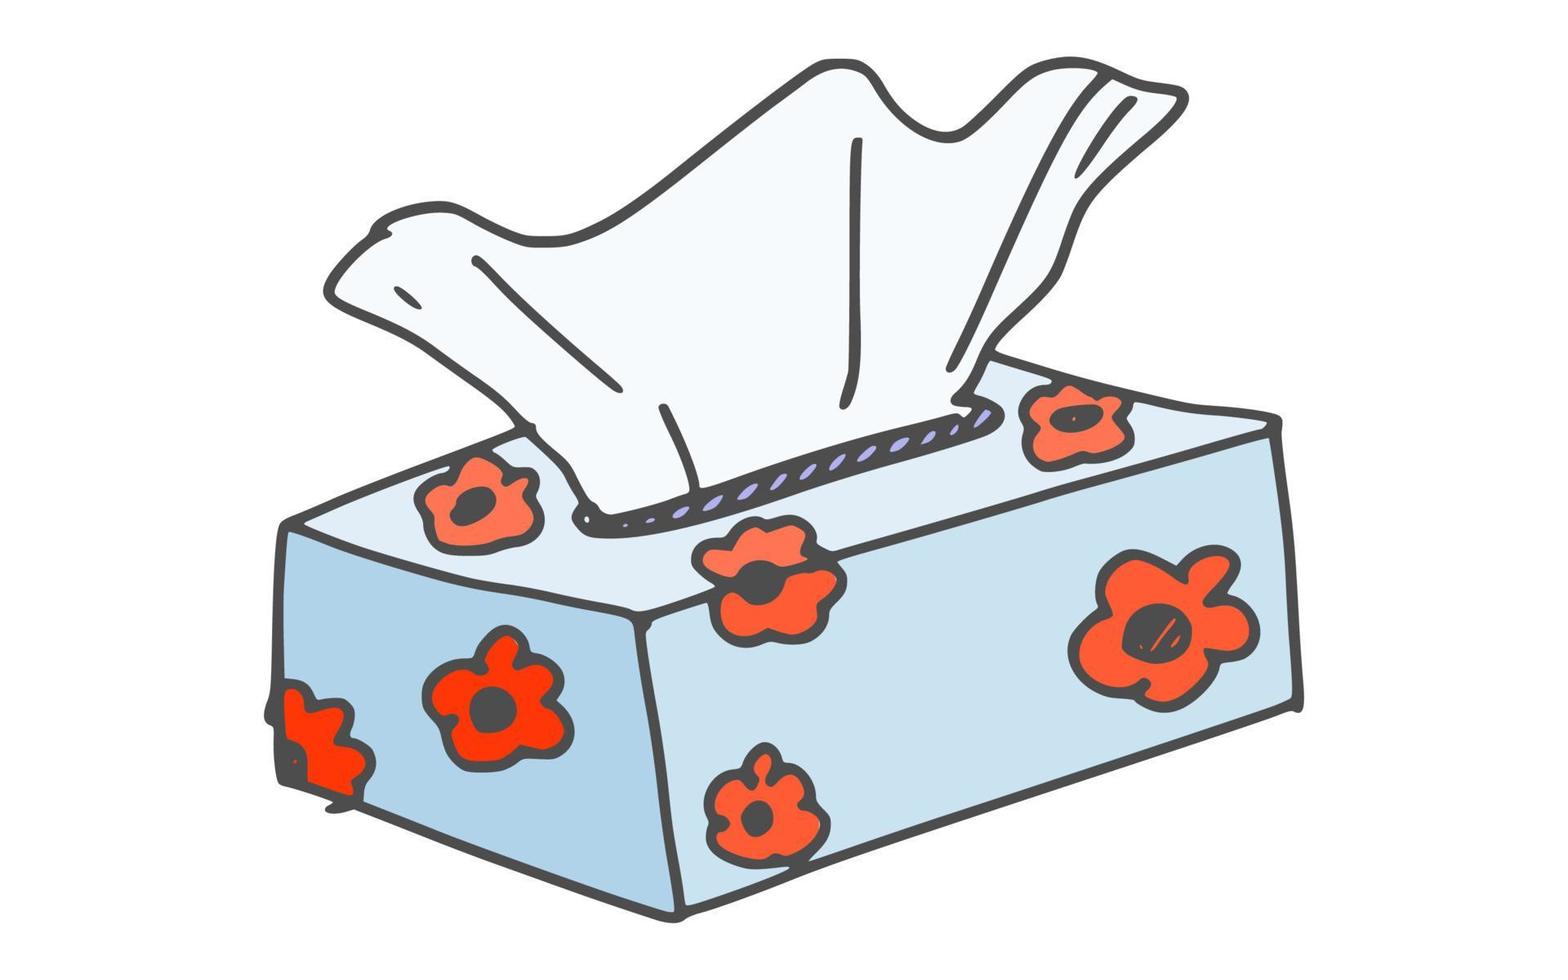 box with paper towels. doodle style image vector